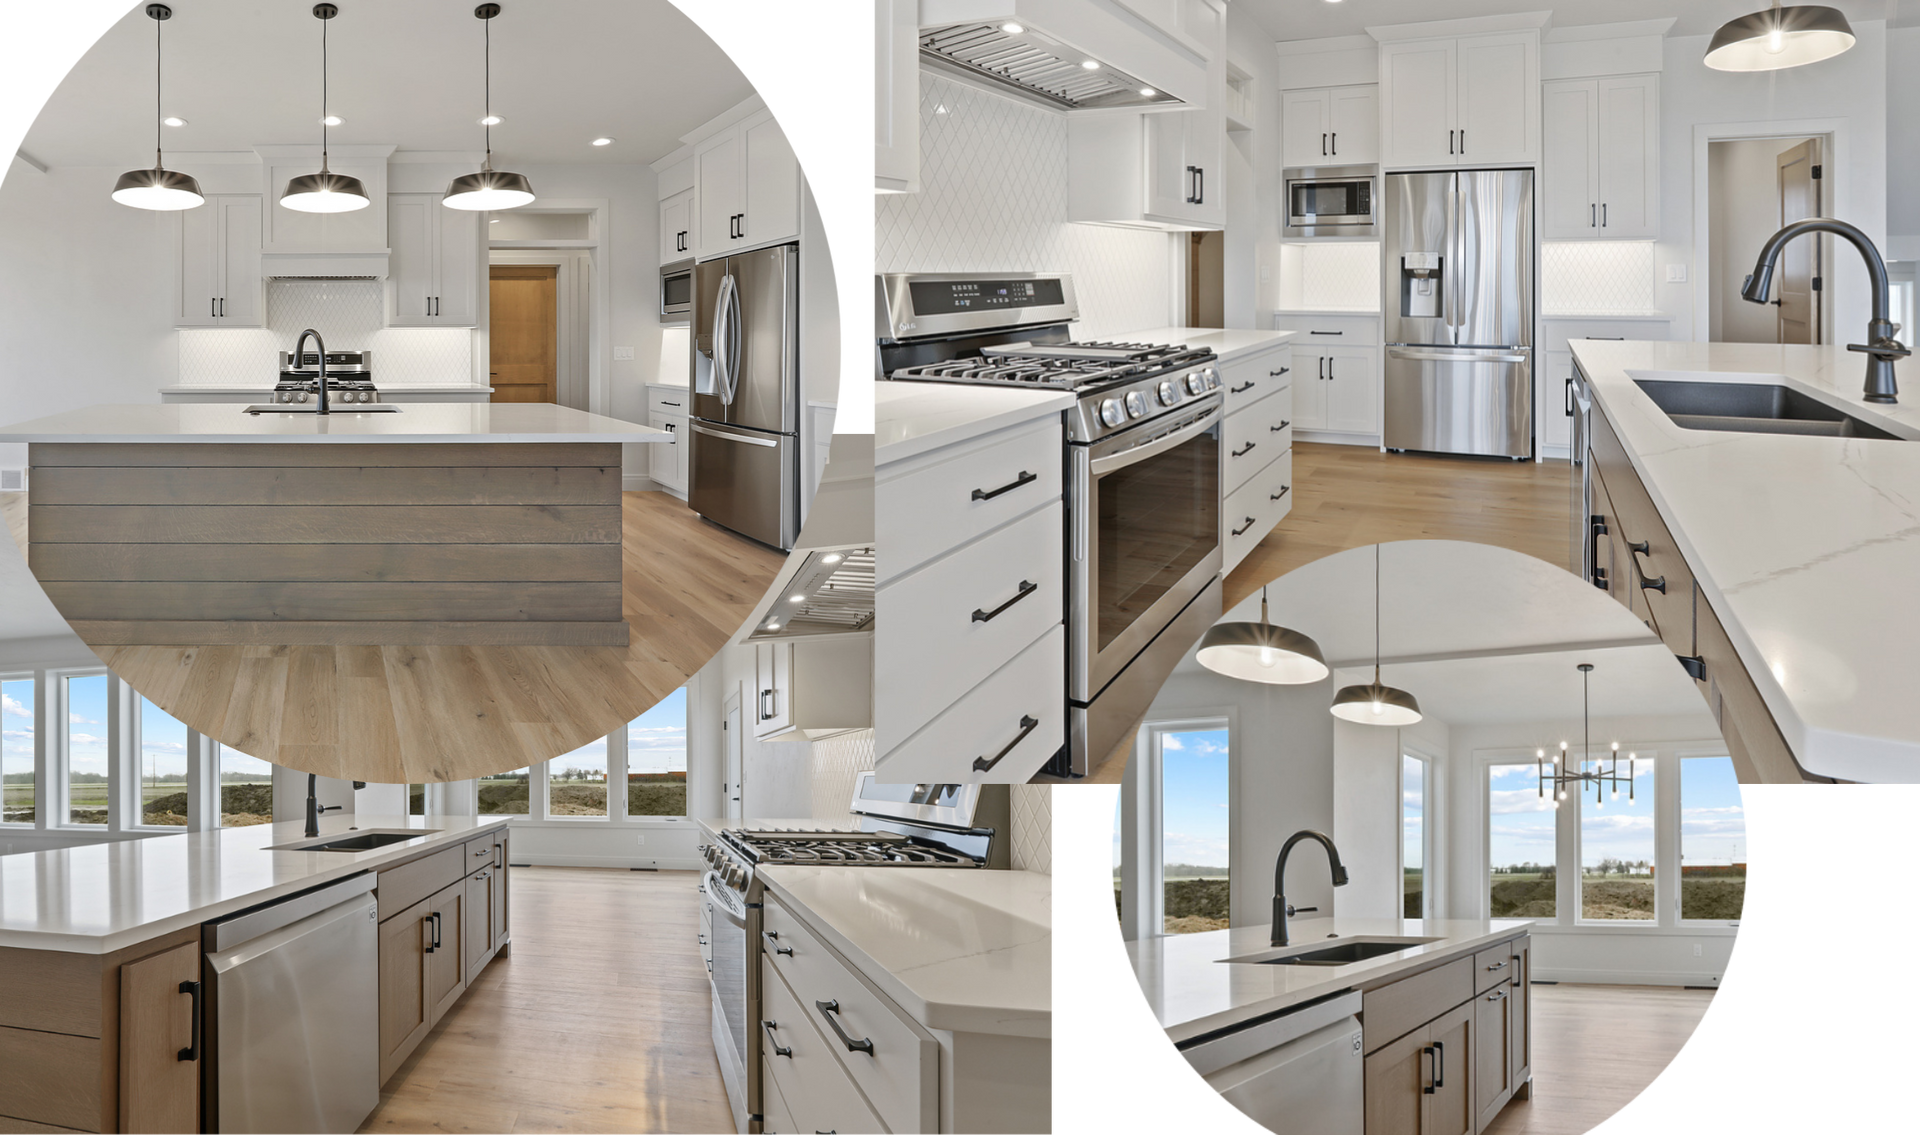 A kitchen with white cabinets and stainless steel appliances